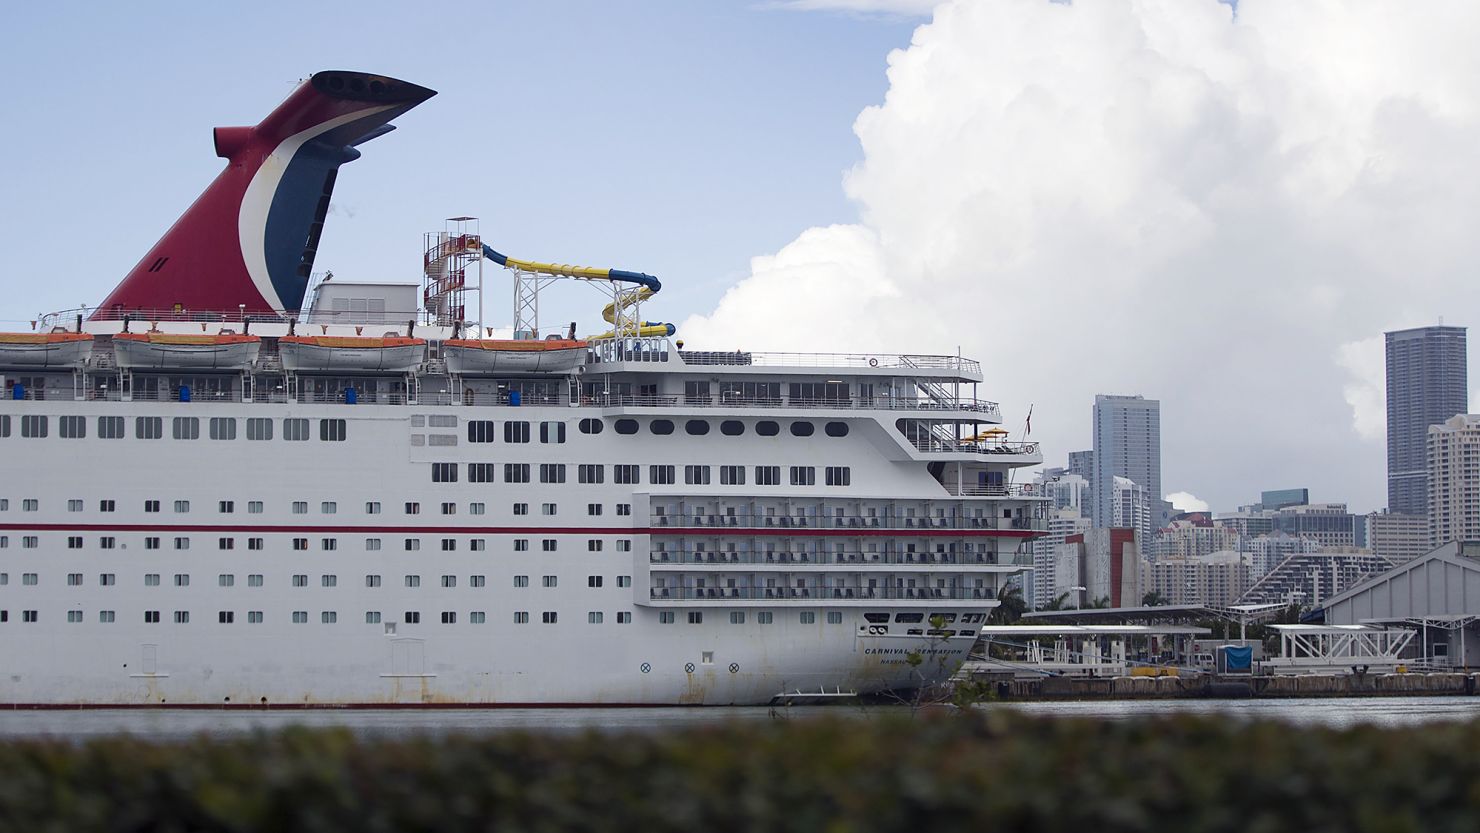 Carnival cruises have been canceled through February 2021.